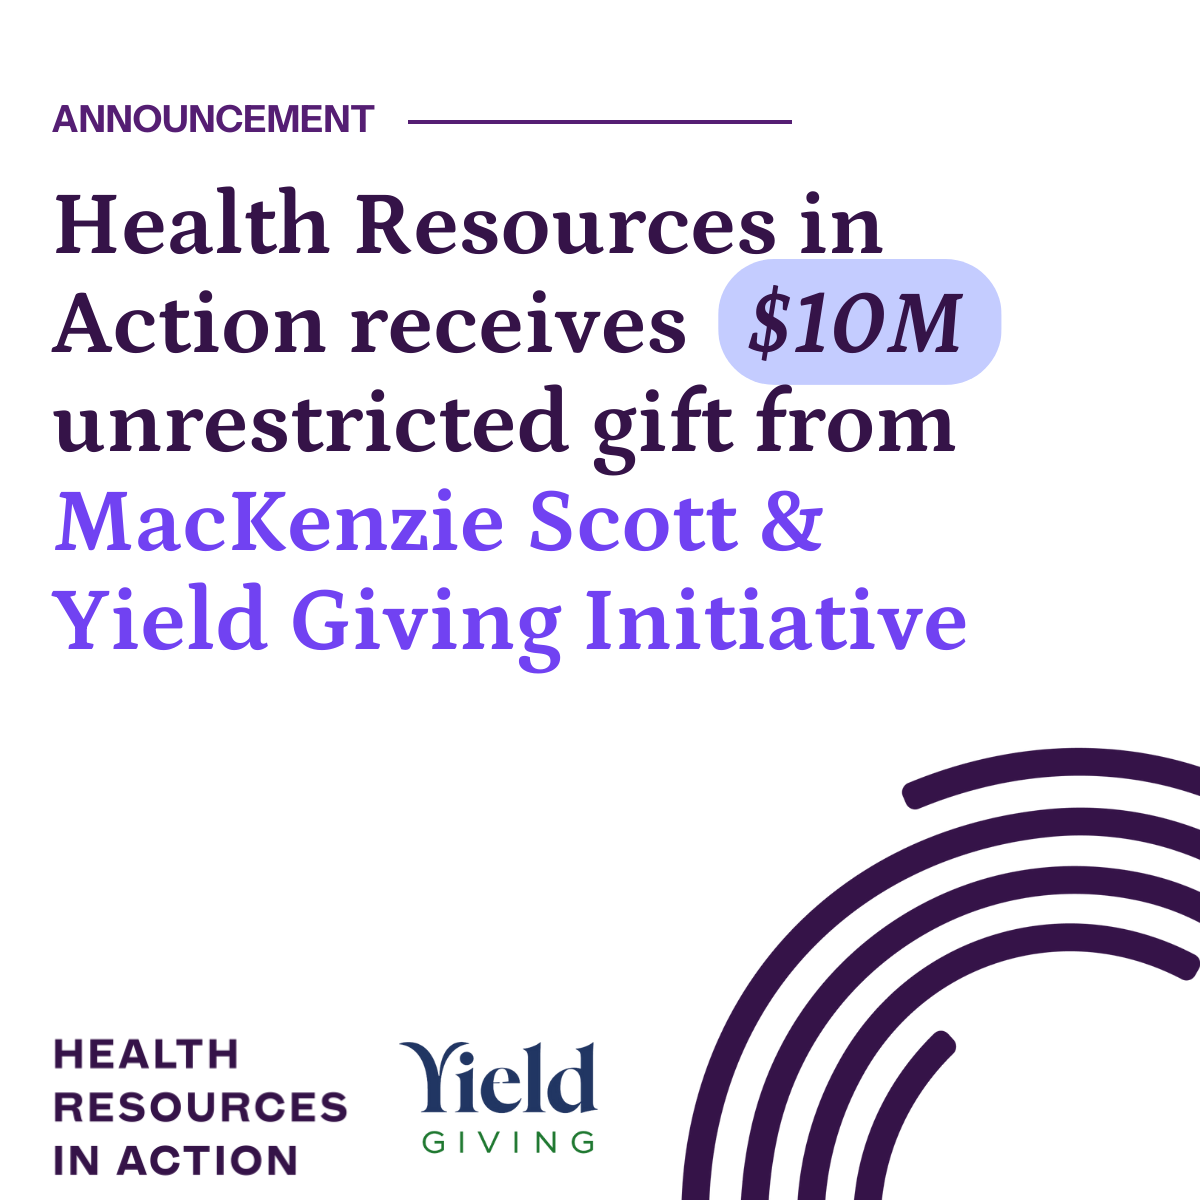  (HRiA) receives $10 million unrestricted gift from MacKenzie Scott & Yield Giving Initiative.